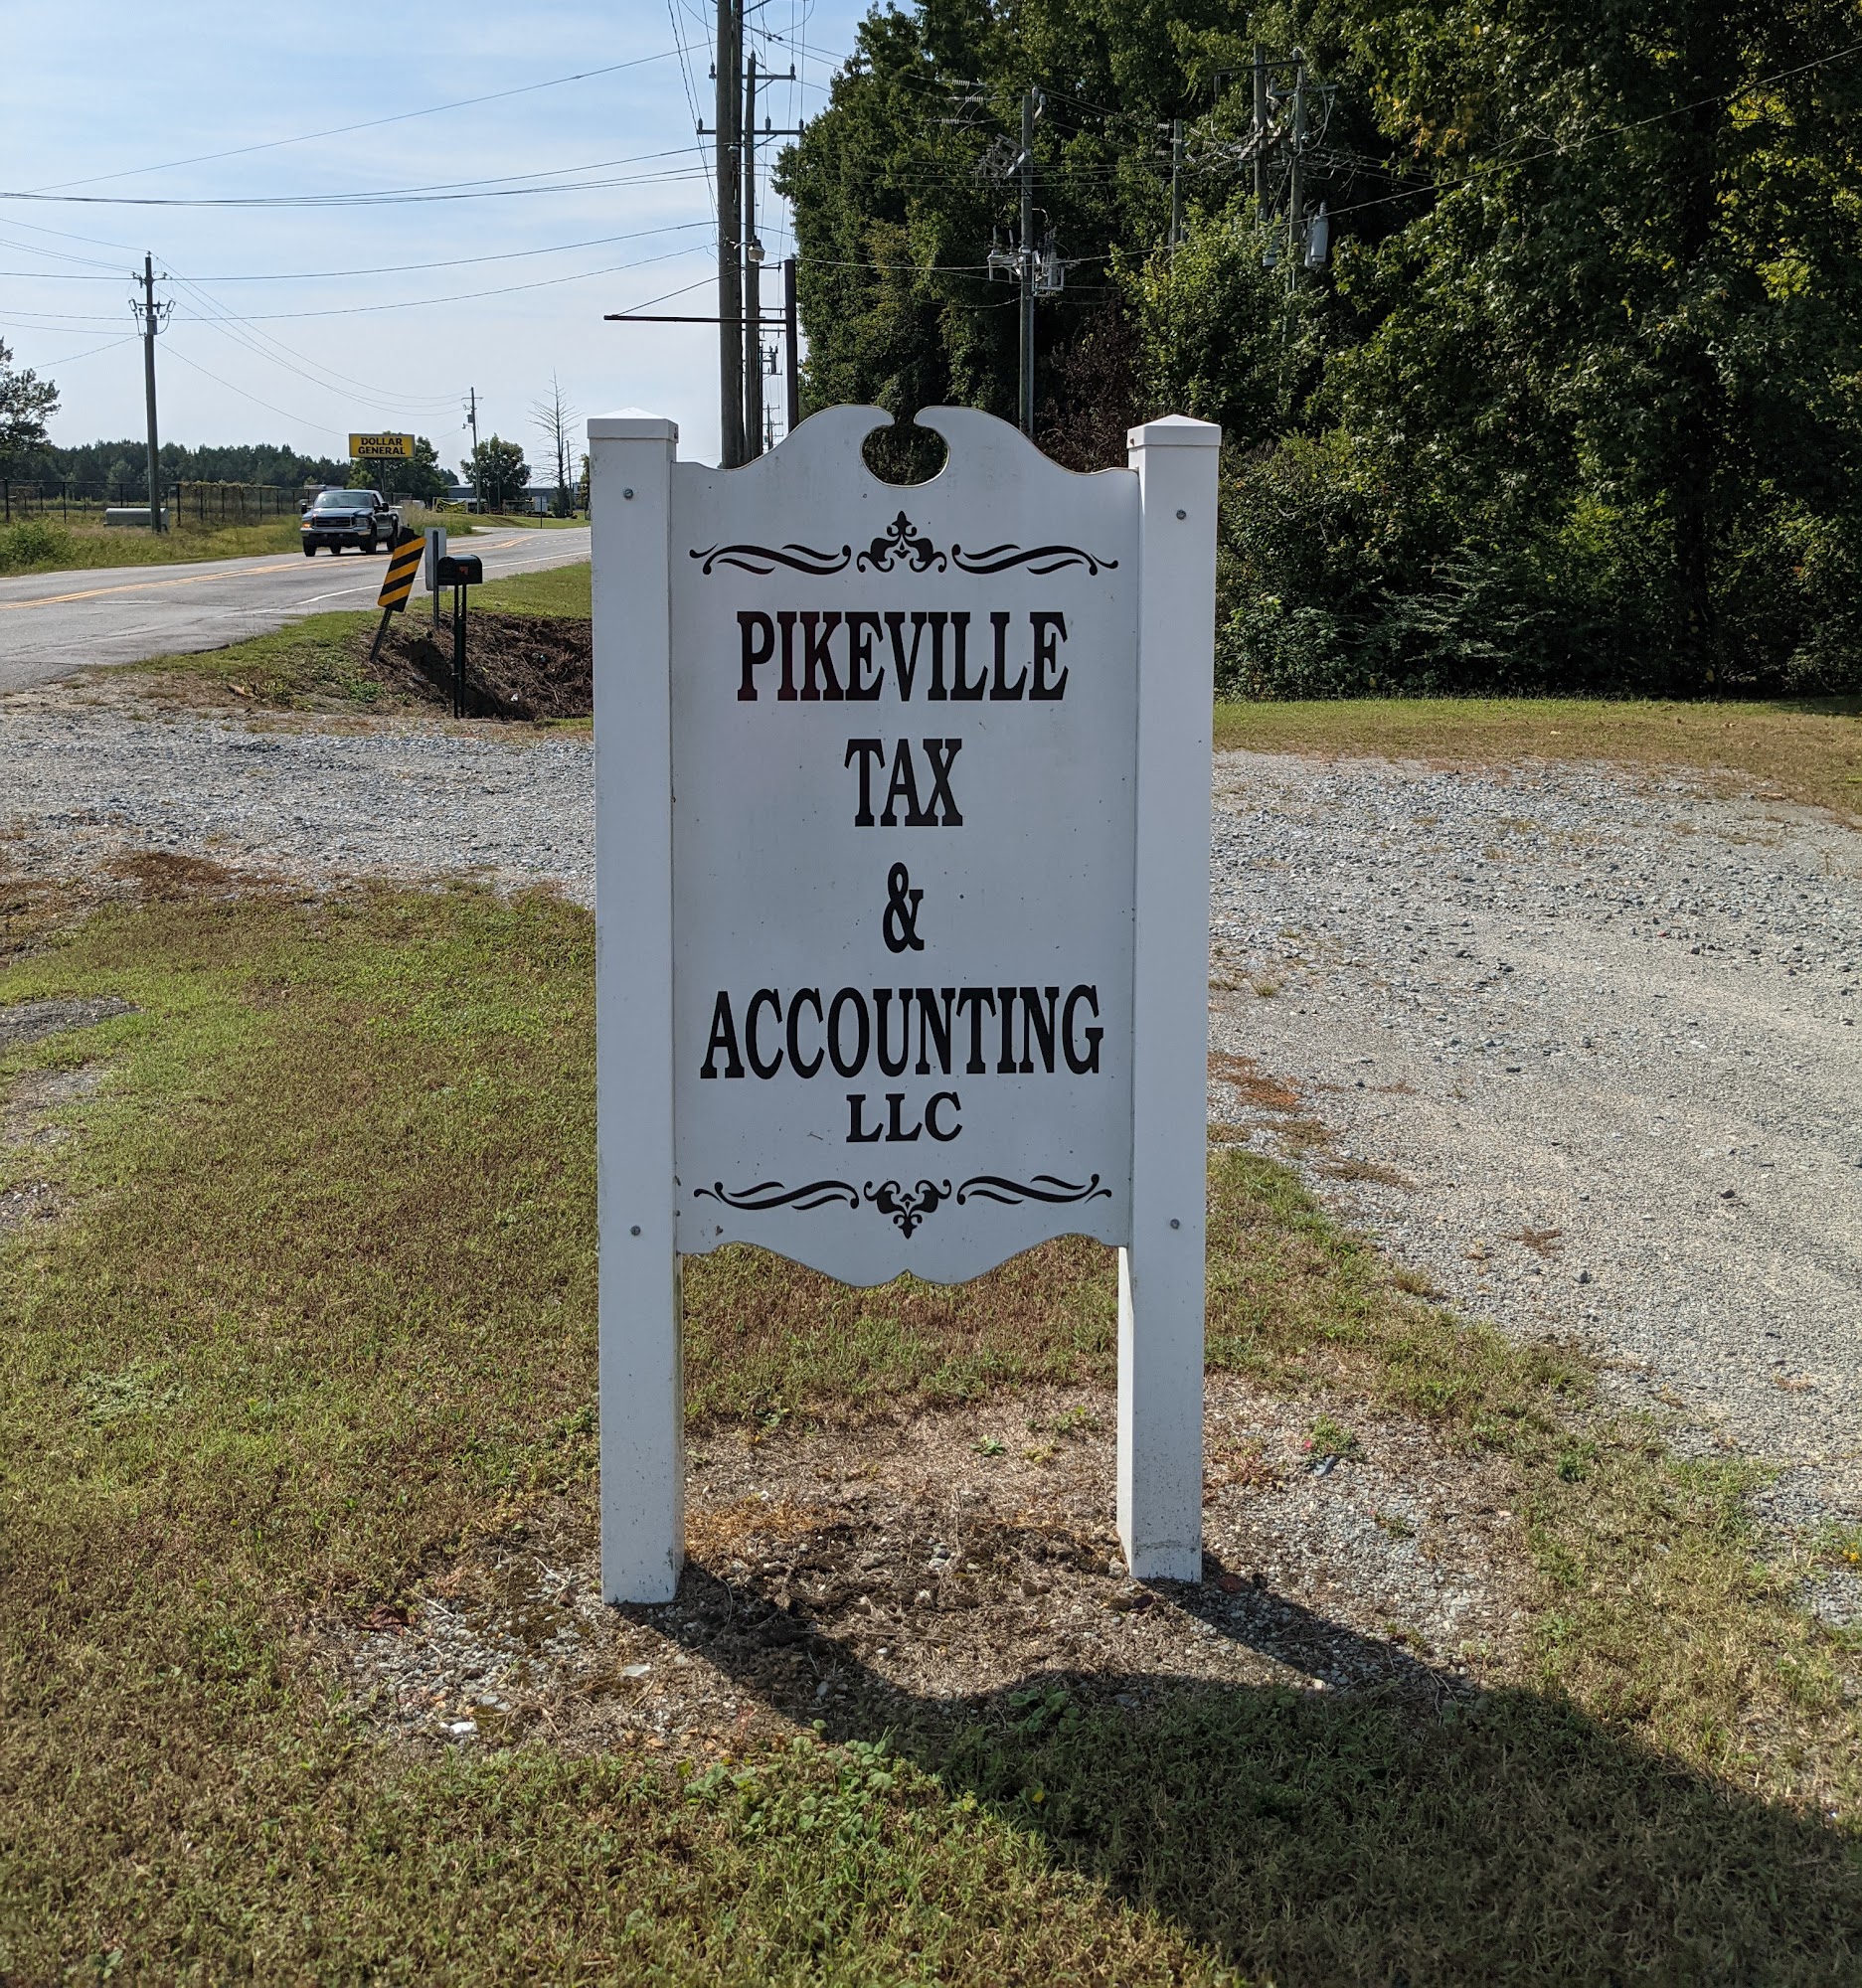 Pikeville Tax Services & Accounting 206 Goldsboro St, Pikeville North Carolina 27863